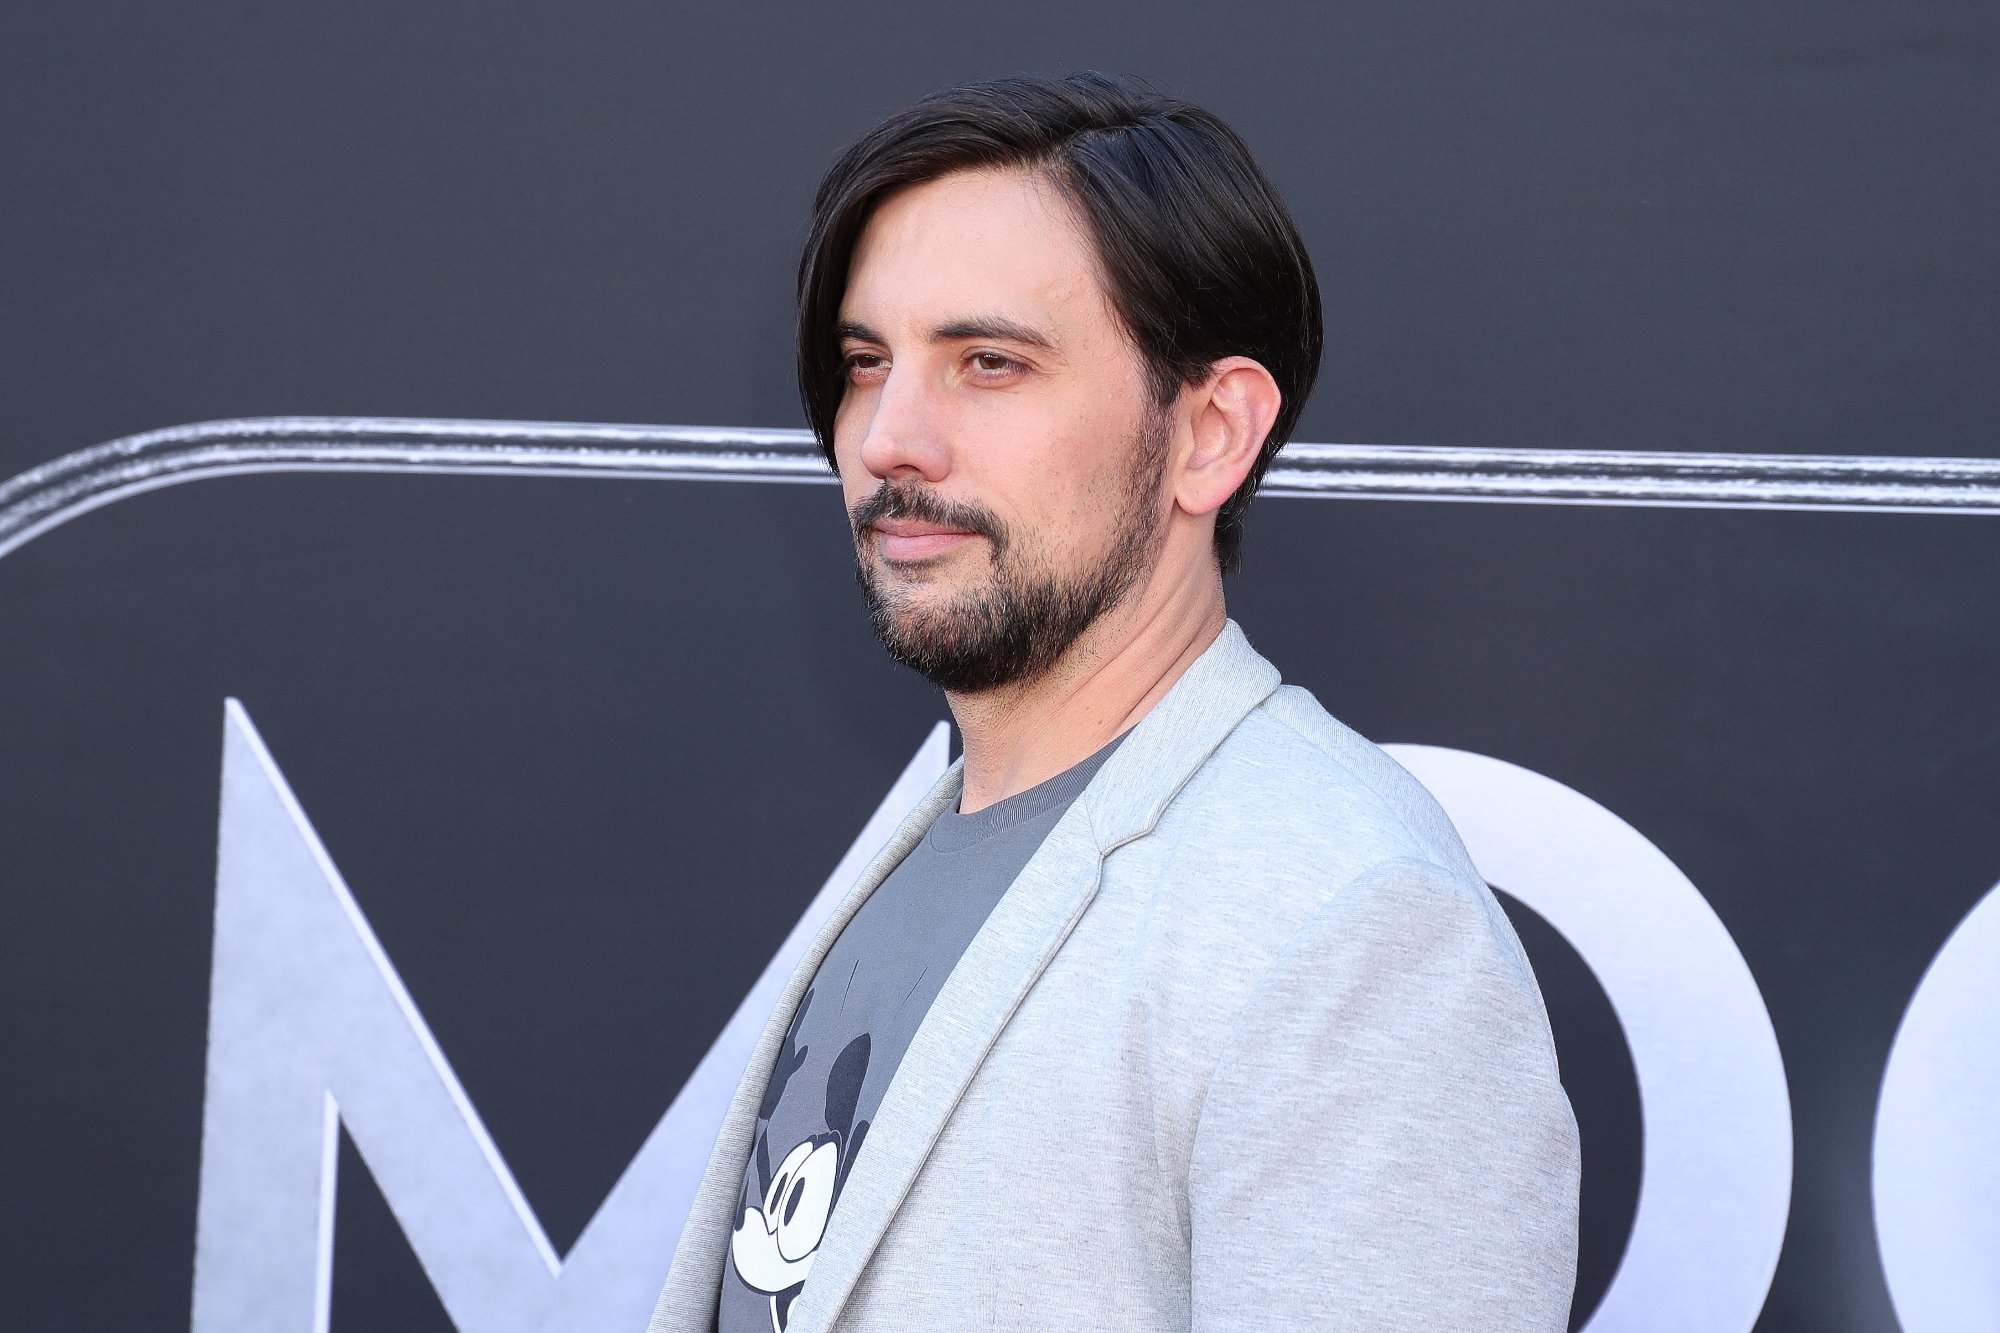 'Fantastic Four' writer Jeremy Slater, who introduced a different villain in the first script draft. Slater is wearing a grey jacket in front of a 'Moon Knight' logo.